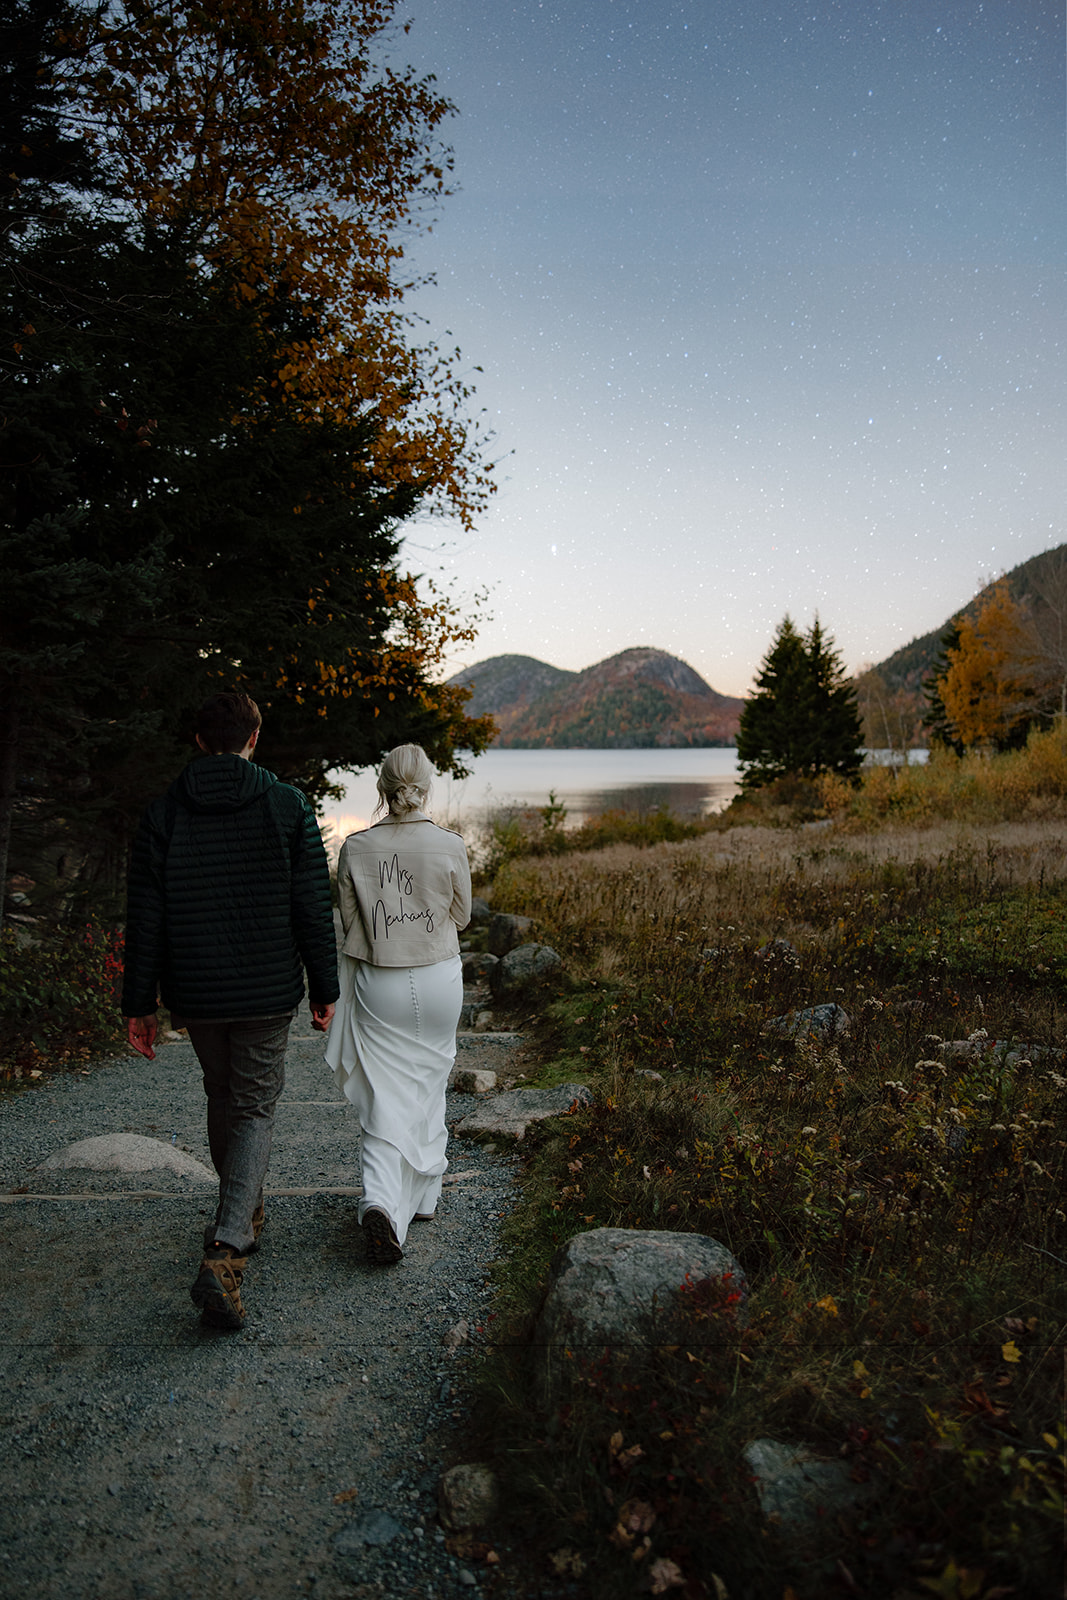 Jordan Pond elopement in the Fall. Acadia national park elopement and microwedding.